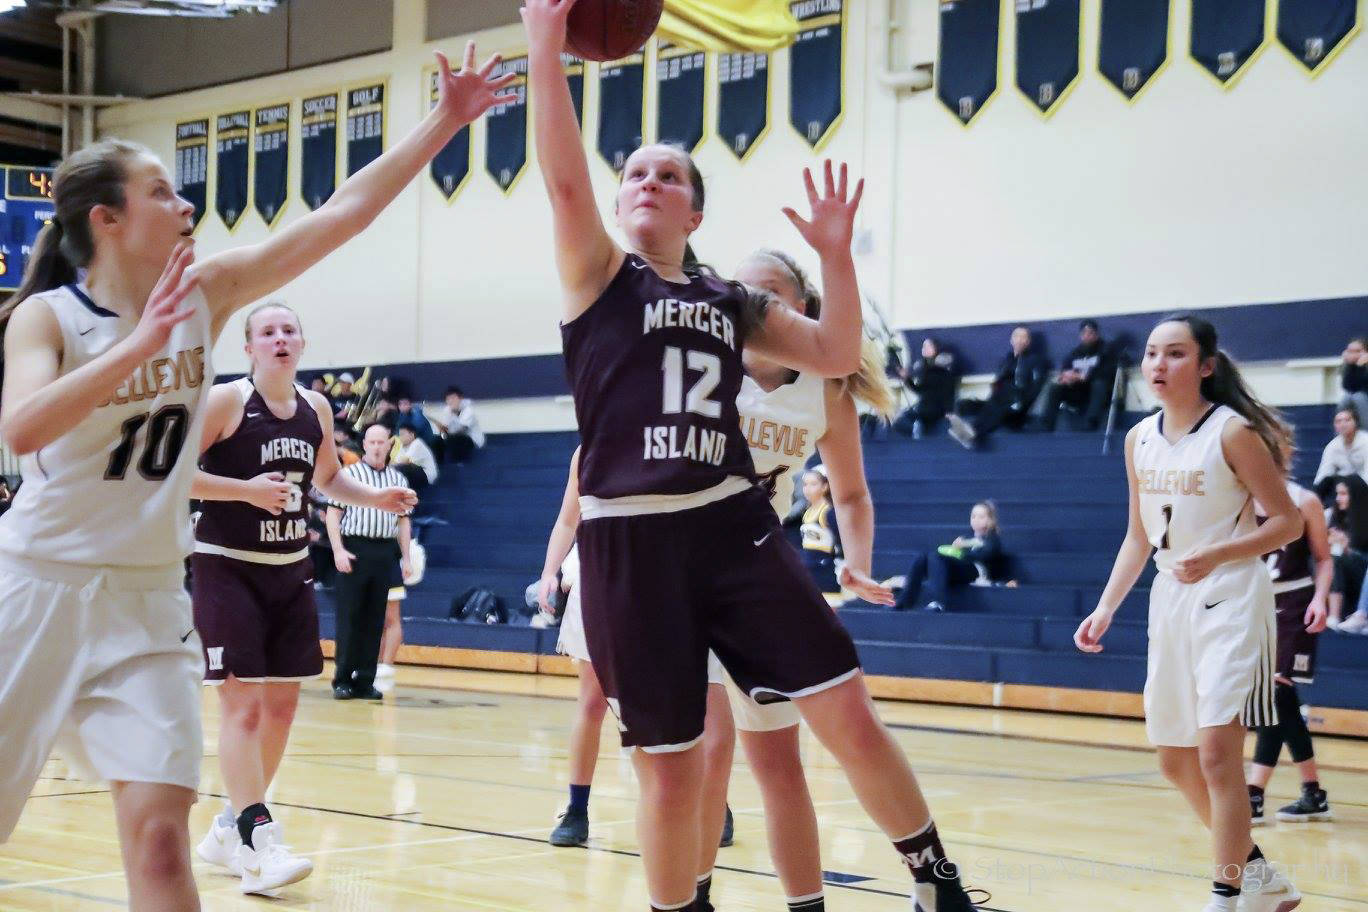 Mercer Island Islanders basketball player Sarah Gest takes the ball to the hoop against the Bellevue Wolverines in a game during the 2017-18 season. Gest is a senior this year. Photo courtesy of Don Borin/Stop Action Photography